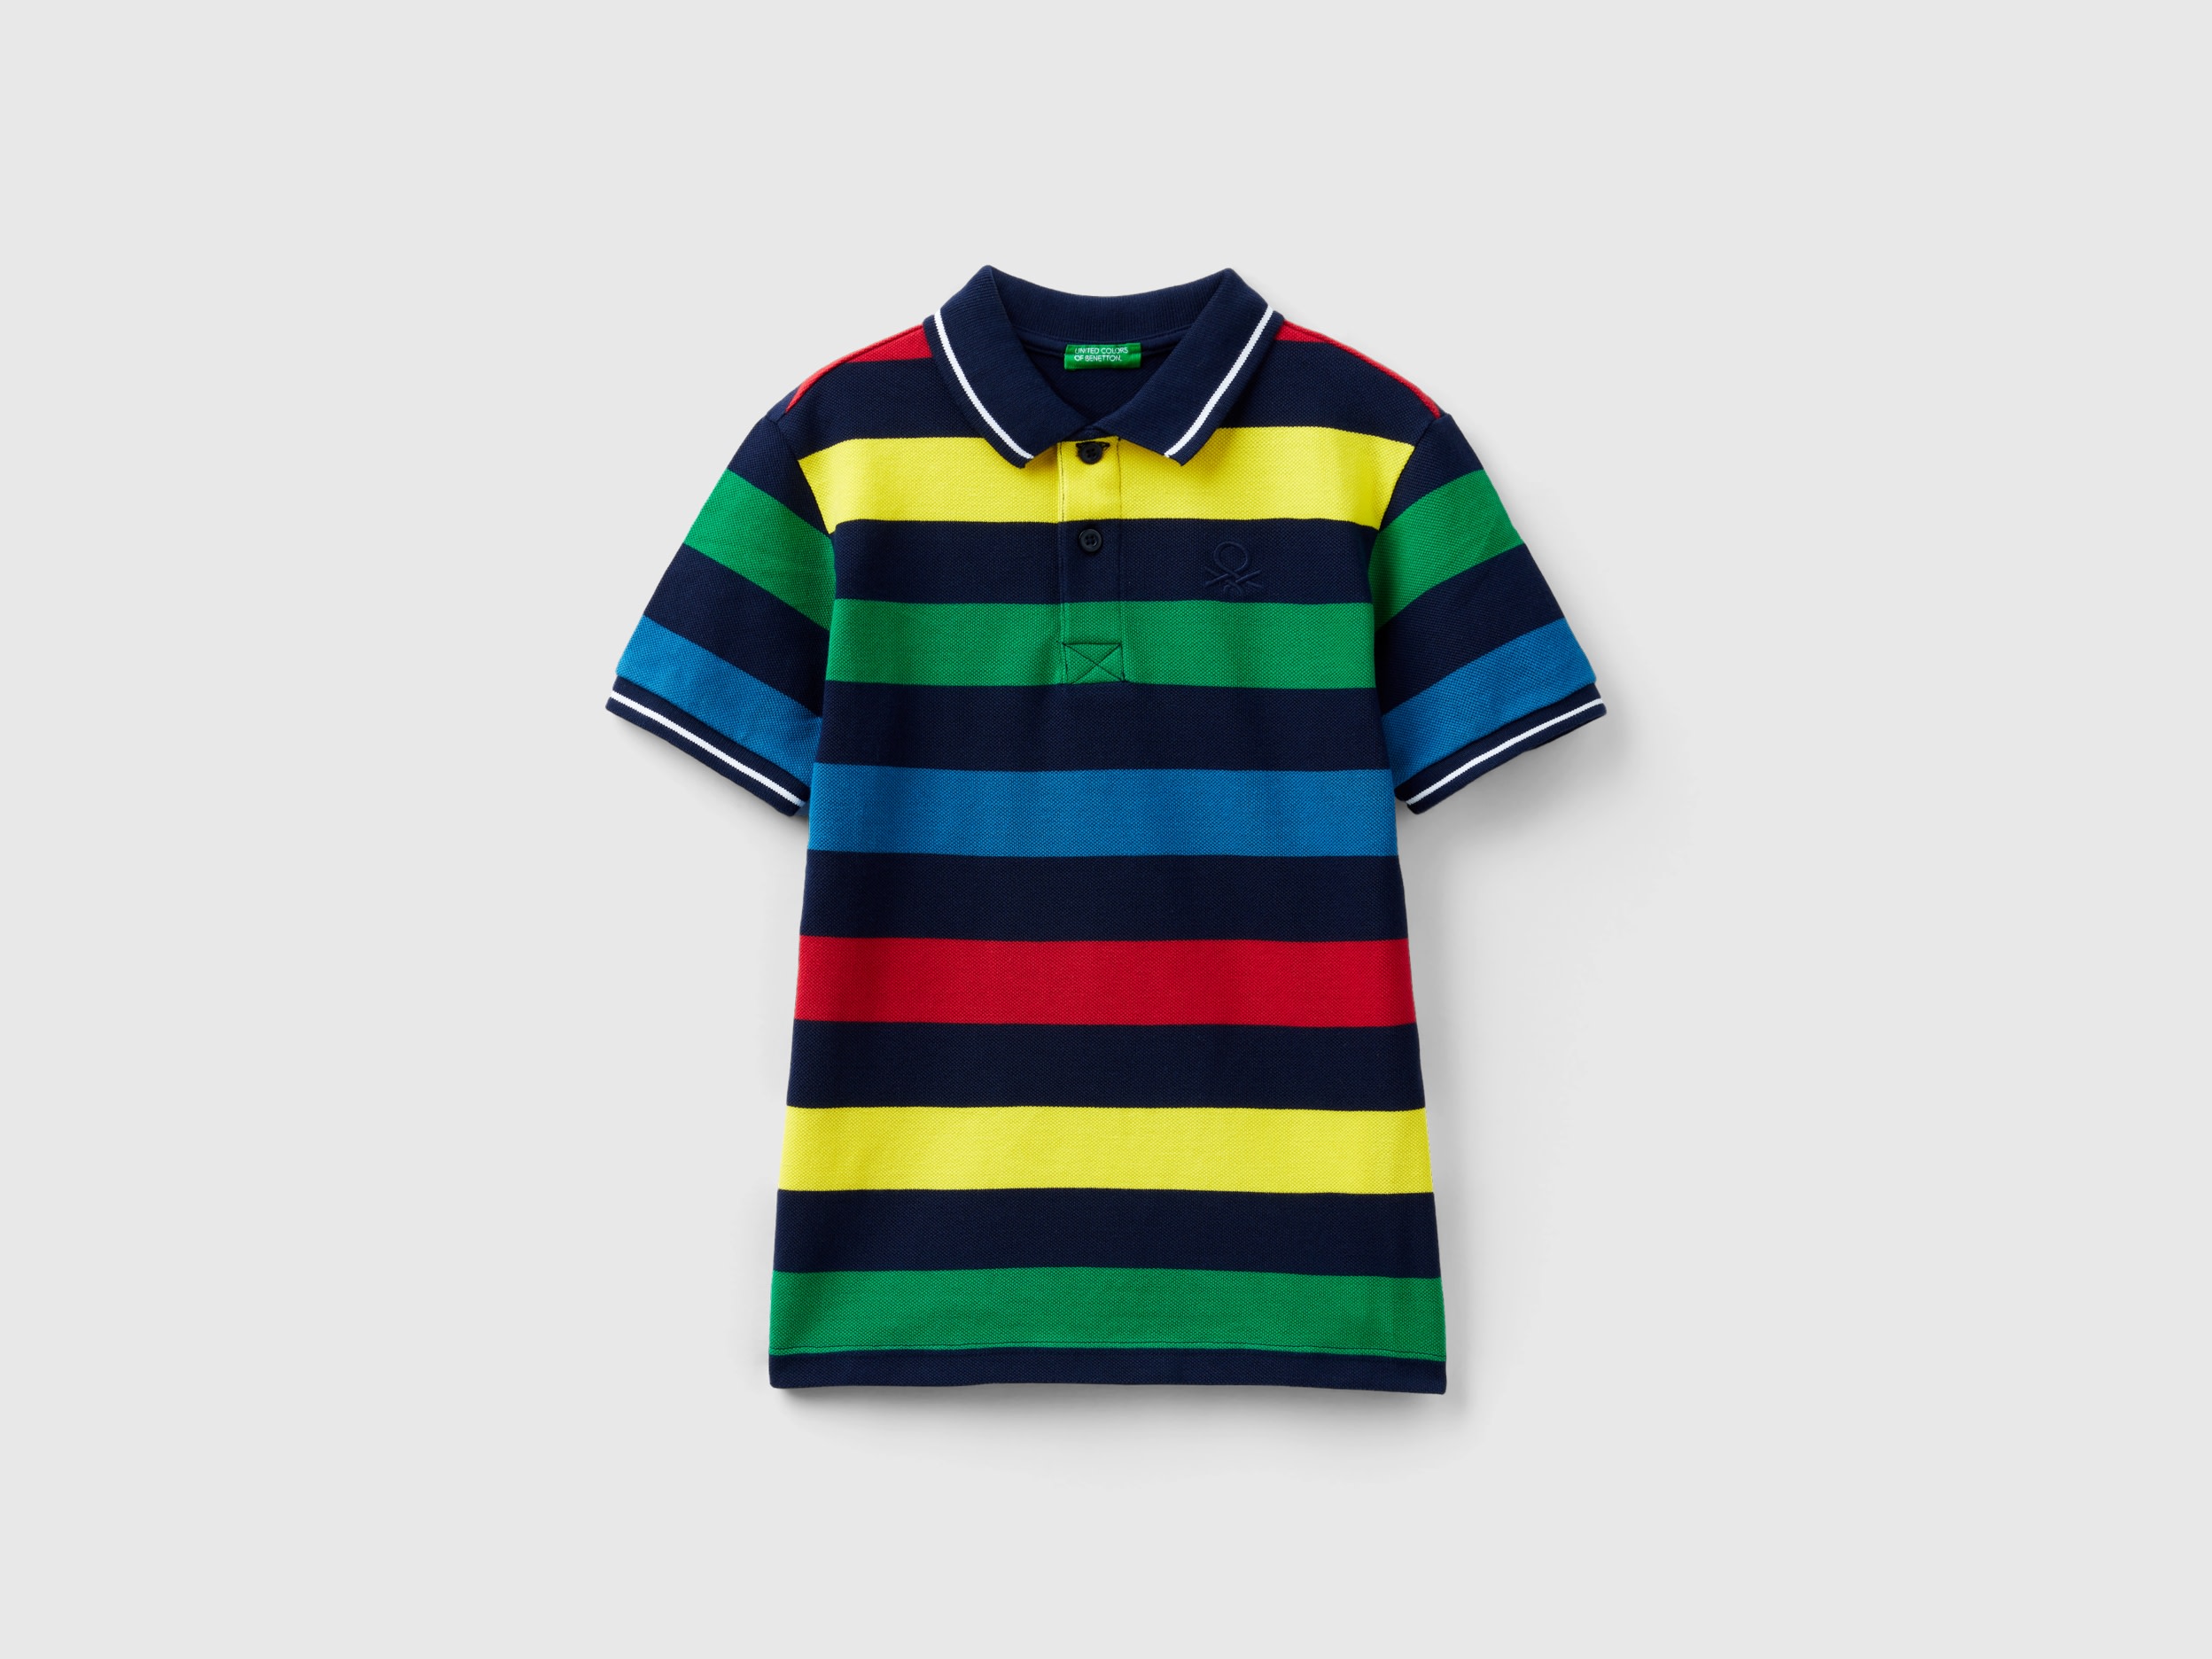 Benetton, Short Sleeve Polo With Stripes, size 2XL, Multi-color, Kids